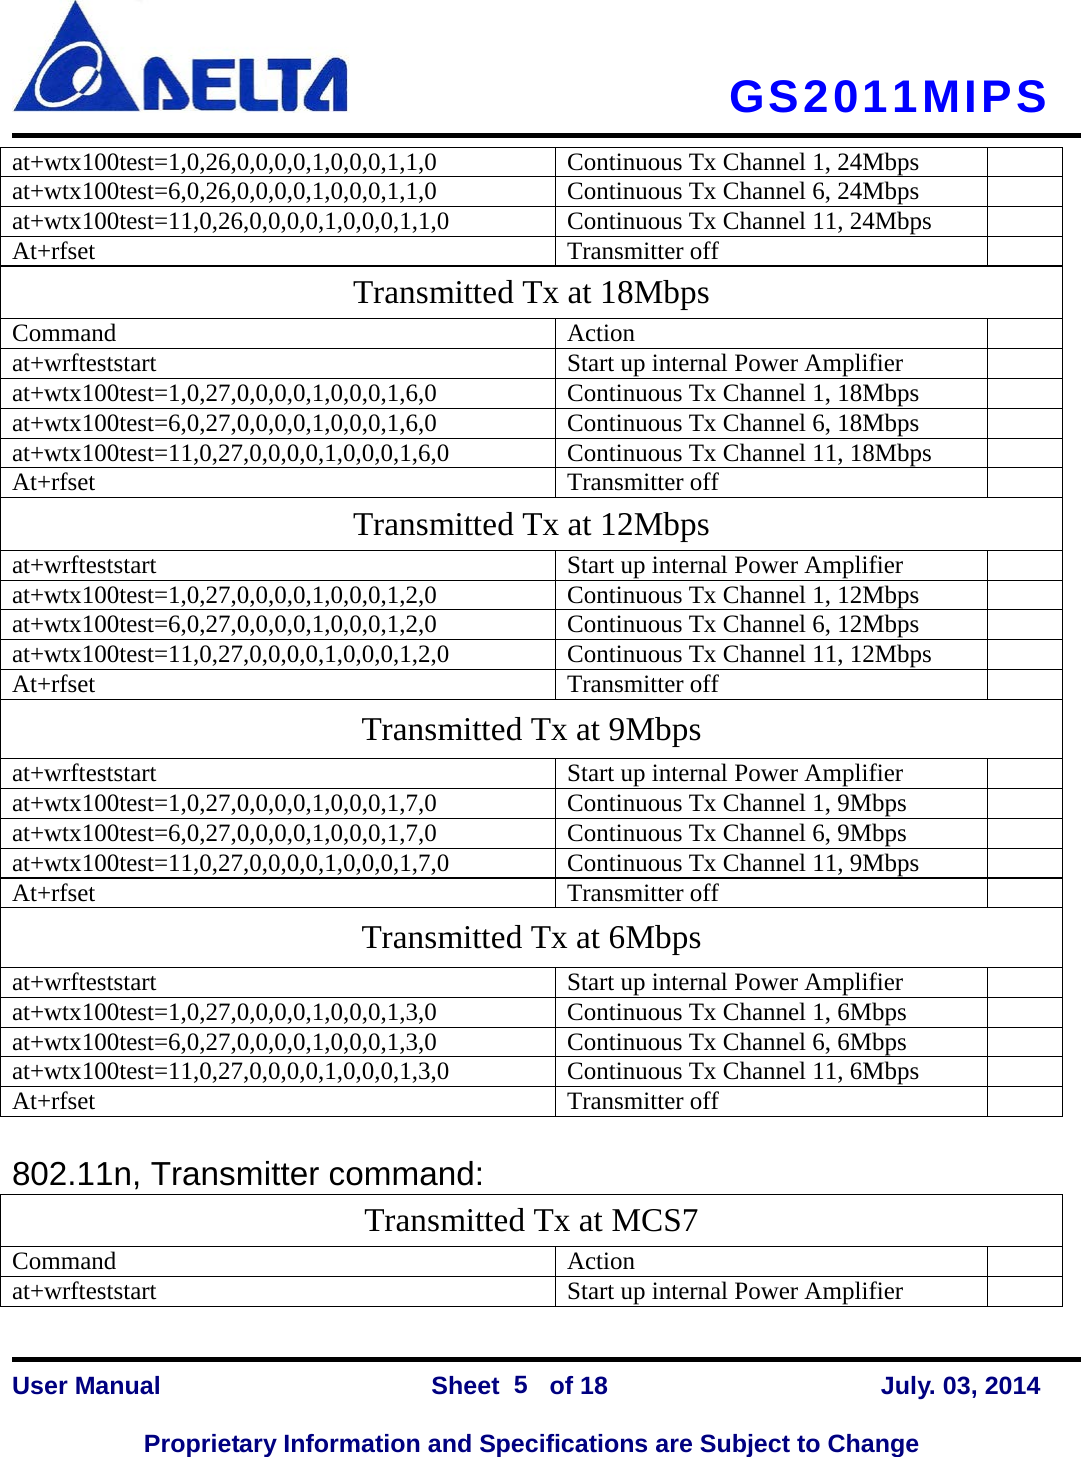     GS2011MIPS  at+wtx100test=1,0,26,0,0,0,0,1,0,0,0,1,1,0 Continuous Tx Channel 1, 24Mbps  at+wtx100test=6,0,26,0,0,0,0,1,0,0,0,1,1,0 Continuous Tx Channel 6, 24Mbps  at+wtx100test=11,0,26,0,0,0,0,1,0,0,0,1,1,0 Continuous Tx Channel 11, 24Mbps  At+rfset Transmitter off  Transmitted Tx at 18Mbps Command Action  at+wrfteststart Start up internal Power Amplifier  at+wtx100test=1,0,27,0,0,0,0,1,0,0,0,1,6,0 Continuous Tx Channel 1, 18Mbps  at+wtx100test=6,0,27,0,0,0,0,1,0,0,0,1,6,0 Continuous Tx Channel 6, 18Mbps  at+wtx100test=11,0,27,0,0,0,0,1,0,0,0,1,6,0 Continuous Tx Channel 11, 18Mbps  At+rfset Transmitter off  Transmitted Tx at 12Mbps at+wrfteststart Start up internal Power Amplifier  at+wtx100test=1,0,27,0,0,0,0,1,0,0,0,1,2,0 Continuous Tx Channel 1, 12Mbps  at+wtx100test=6,0,27,0,0,0,0,1,0,0,0,1,2,0 Continuous Tx Channel 6, 12Mbps  at+wtx100test=11,0,27,0,0,0,0,1,0,0,0,1,2,0 Continuous Tx Channel 11, 12Mbps  At+rfset Transmitter off  Transmitted Tx at 9Mbps at+wrfteststart Start up internal Power Amplifier  at+wtx100test=1,0,27,0,0,0,0,1,0,0,0,1,7,0 Continuous Tx Channel 1, 9Mbps  at+wtx100test=6,0,27,0,0,0,0,1,0,0,0,1,7,0 Continuous Tx Channel 6, 9Mbps  at+wtx100test=11,0,27,0,0,0,0,1,0,0,0,1,7,0 Continuous Tx Channel 11, 9Mbps  At+rfset Transmitter off  Transmitted Tx at 6Mbps at+wrfteststart Start up internal Power Amplifier  at+wtx100test=1,0,27,0,0,0,0,1,0,0,0,1,3,0 Continuous Tx Channel 1, 6Mbps  at+wtx100test=6,0,27,0,0,0,0,1,0,0,0,1,3,0 Continuous Tx Channel 6, 6Mbps  at+wtx100test=11,0,27,0,0,0,0,1,0,0,0,1,3,0 Continuous Tx Channel 11, 6Mbps  At+rfset Transmitter off   802.11n, Transmitter command: Transmitted Tx at MCS7 Command Action  at+wrfteststart Start up internal Power Amplifier    User Manual                Sheet    of 18      July. 03, 2014  Proprietary Information and Specifications are Subject to Change 5 